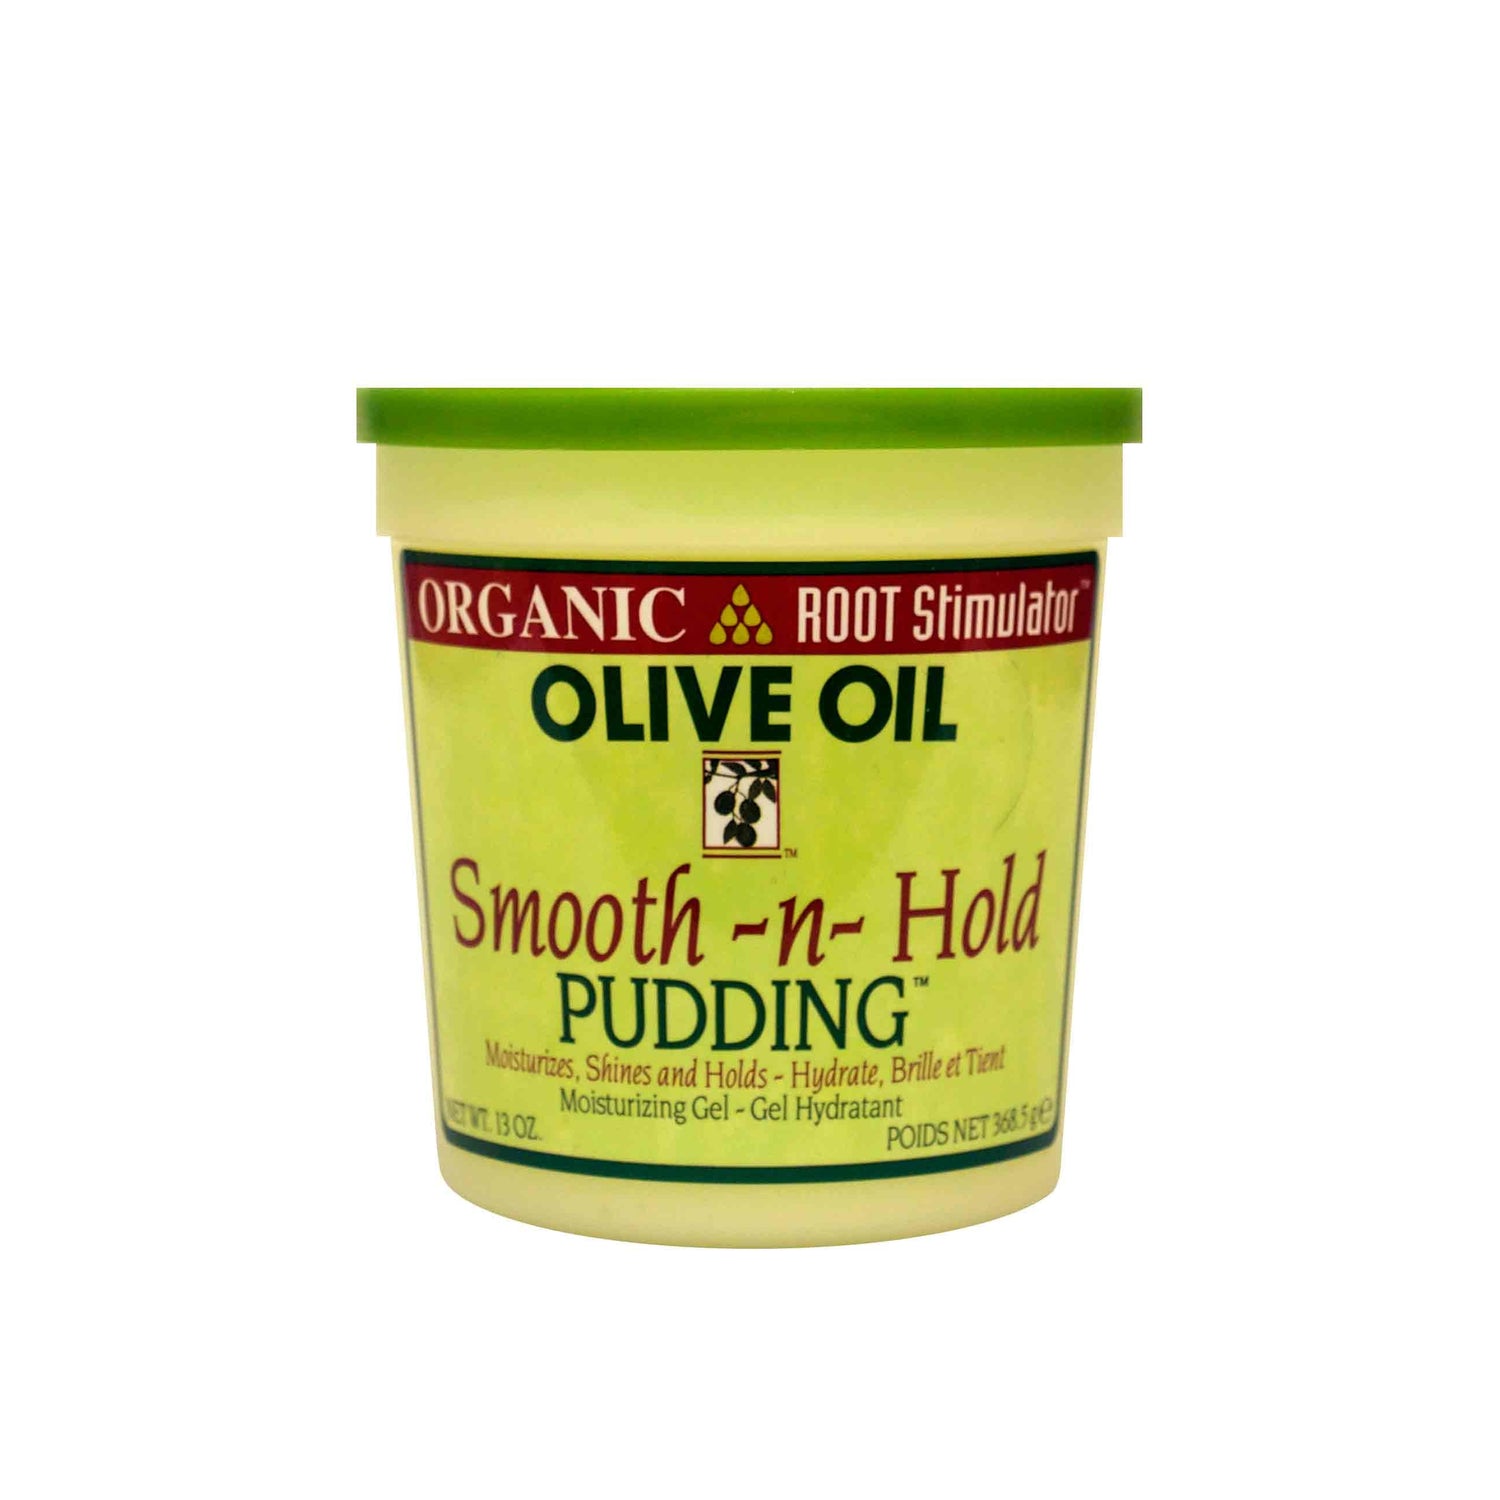 Organic Root Stimulator Olive Oil Smooth -n- Hold Pudding 365.5g